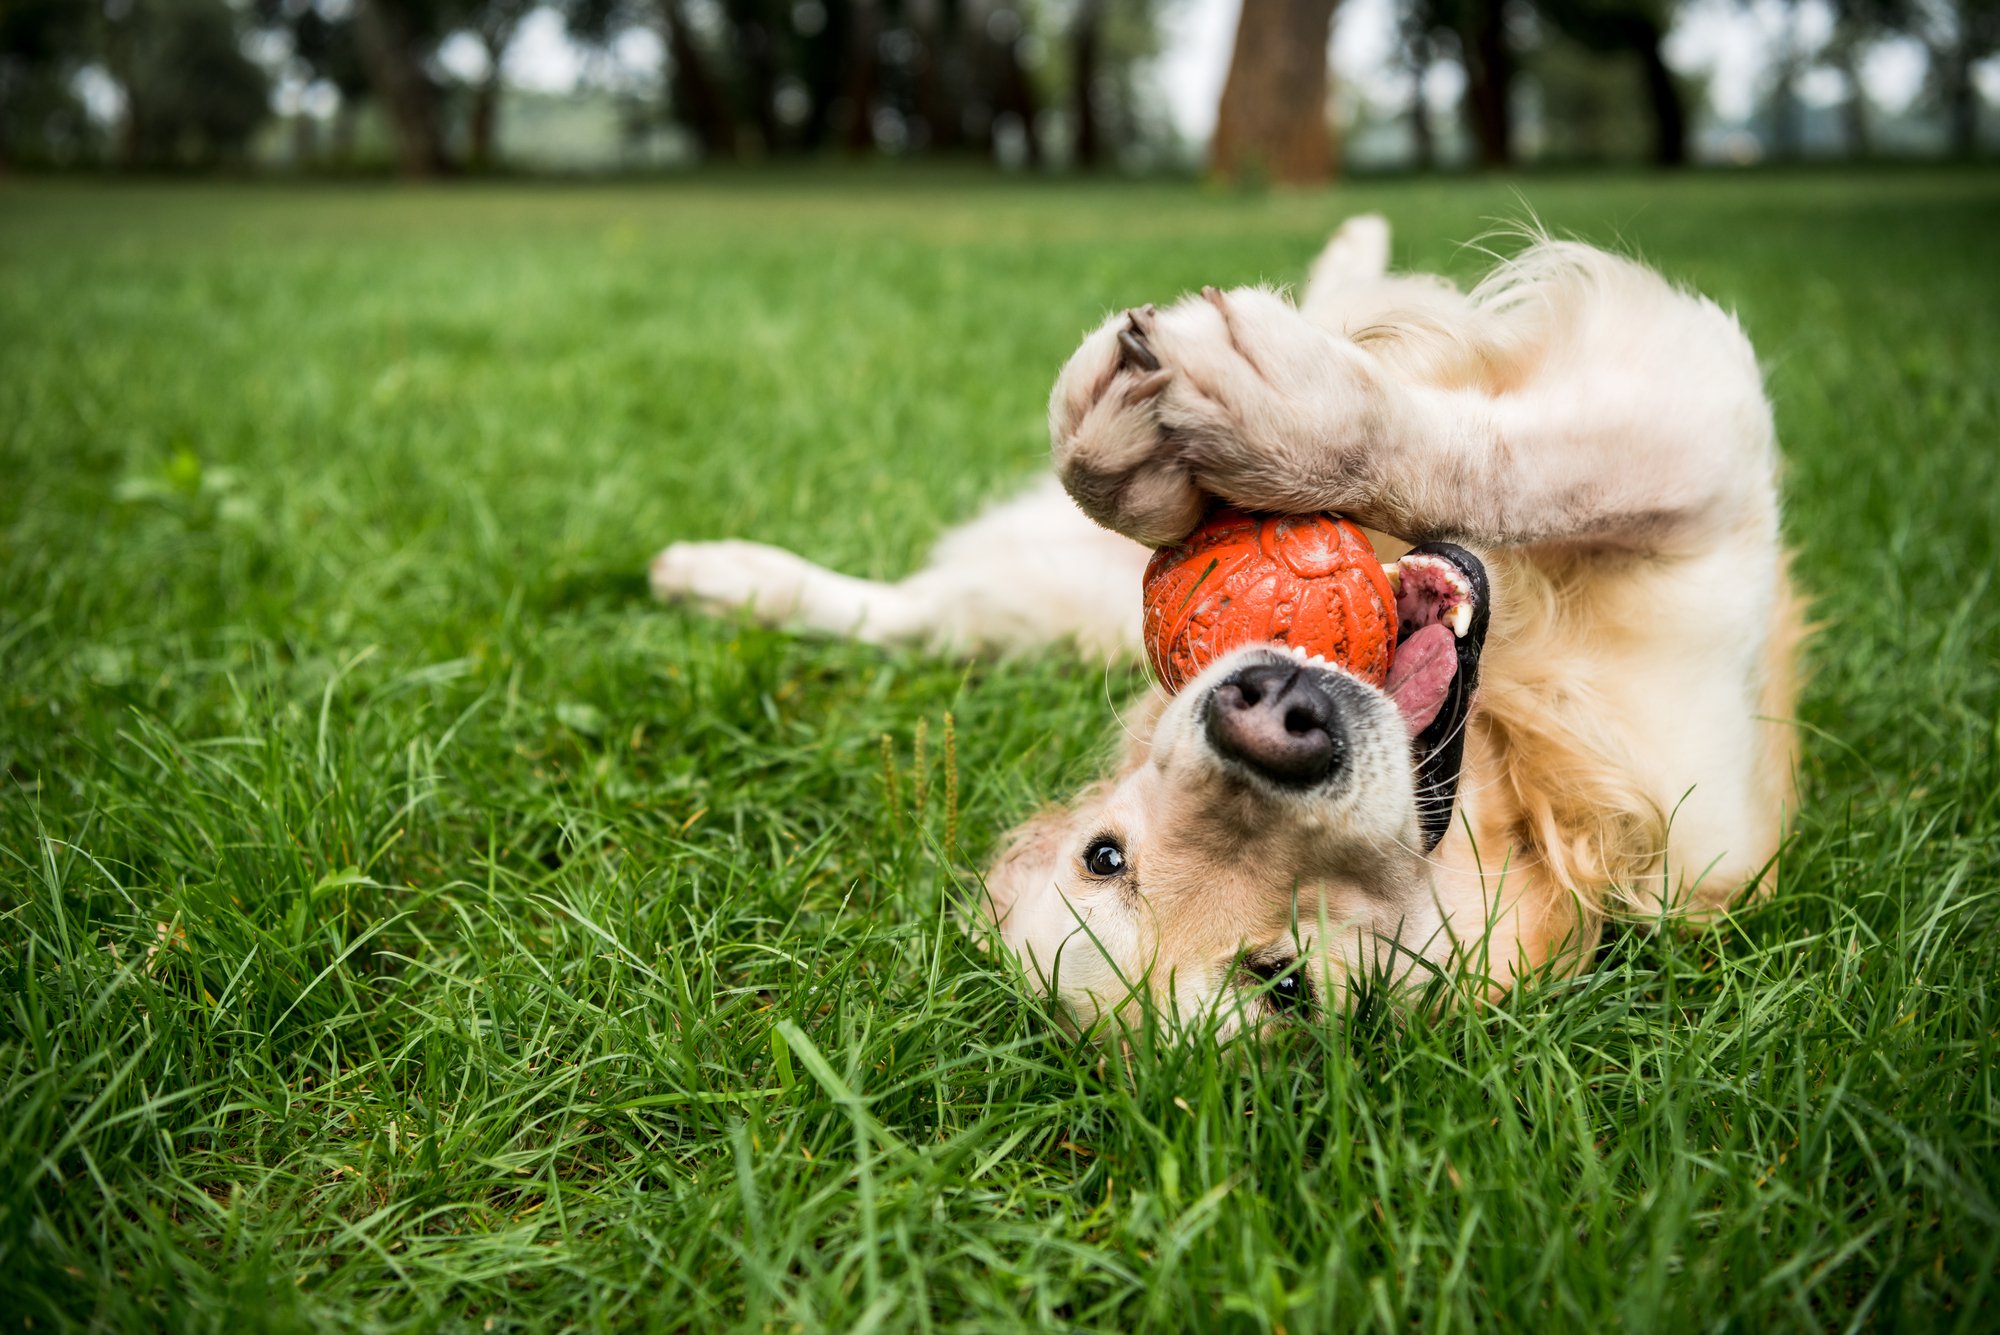 Make Your Doggy Daycare Fun With These 7 Engaging Ideas!